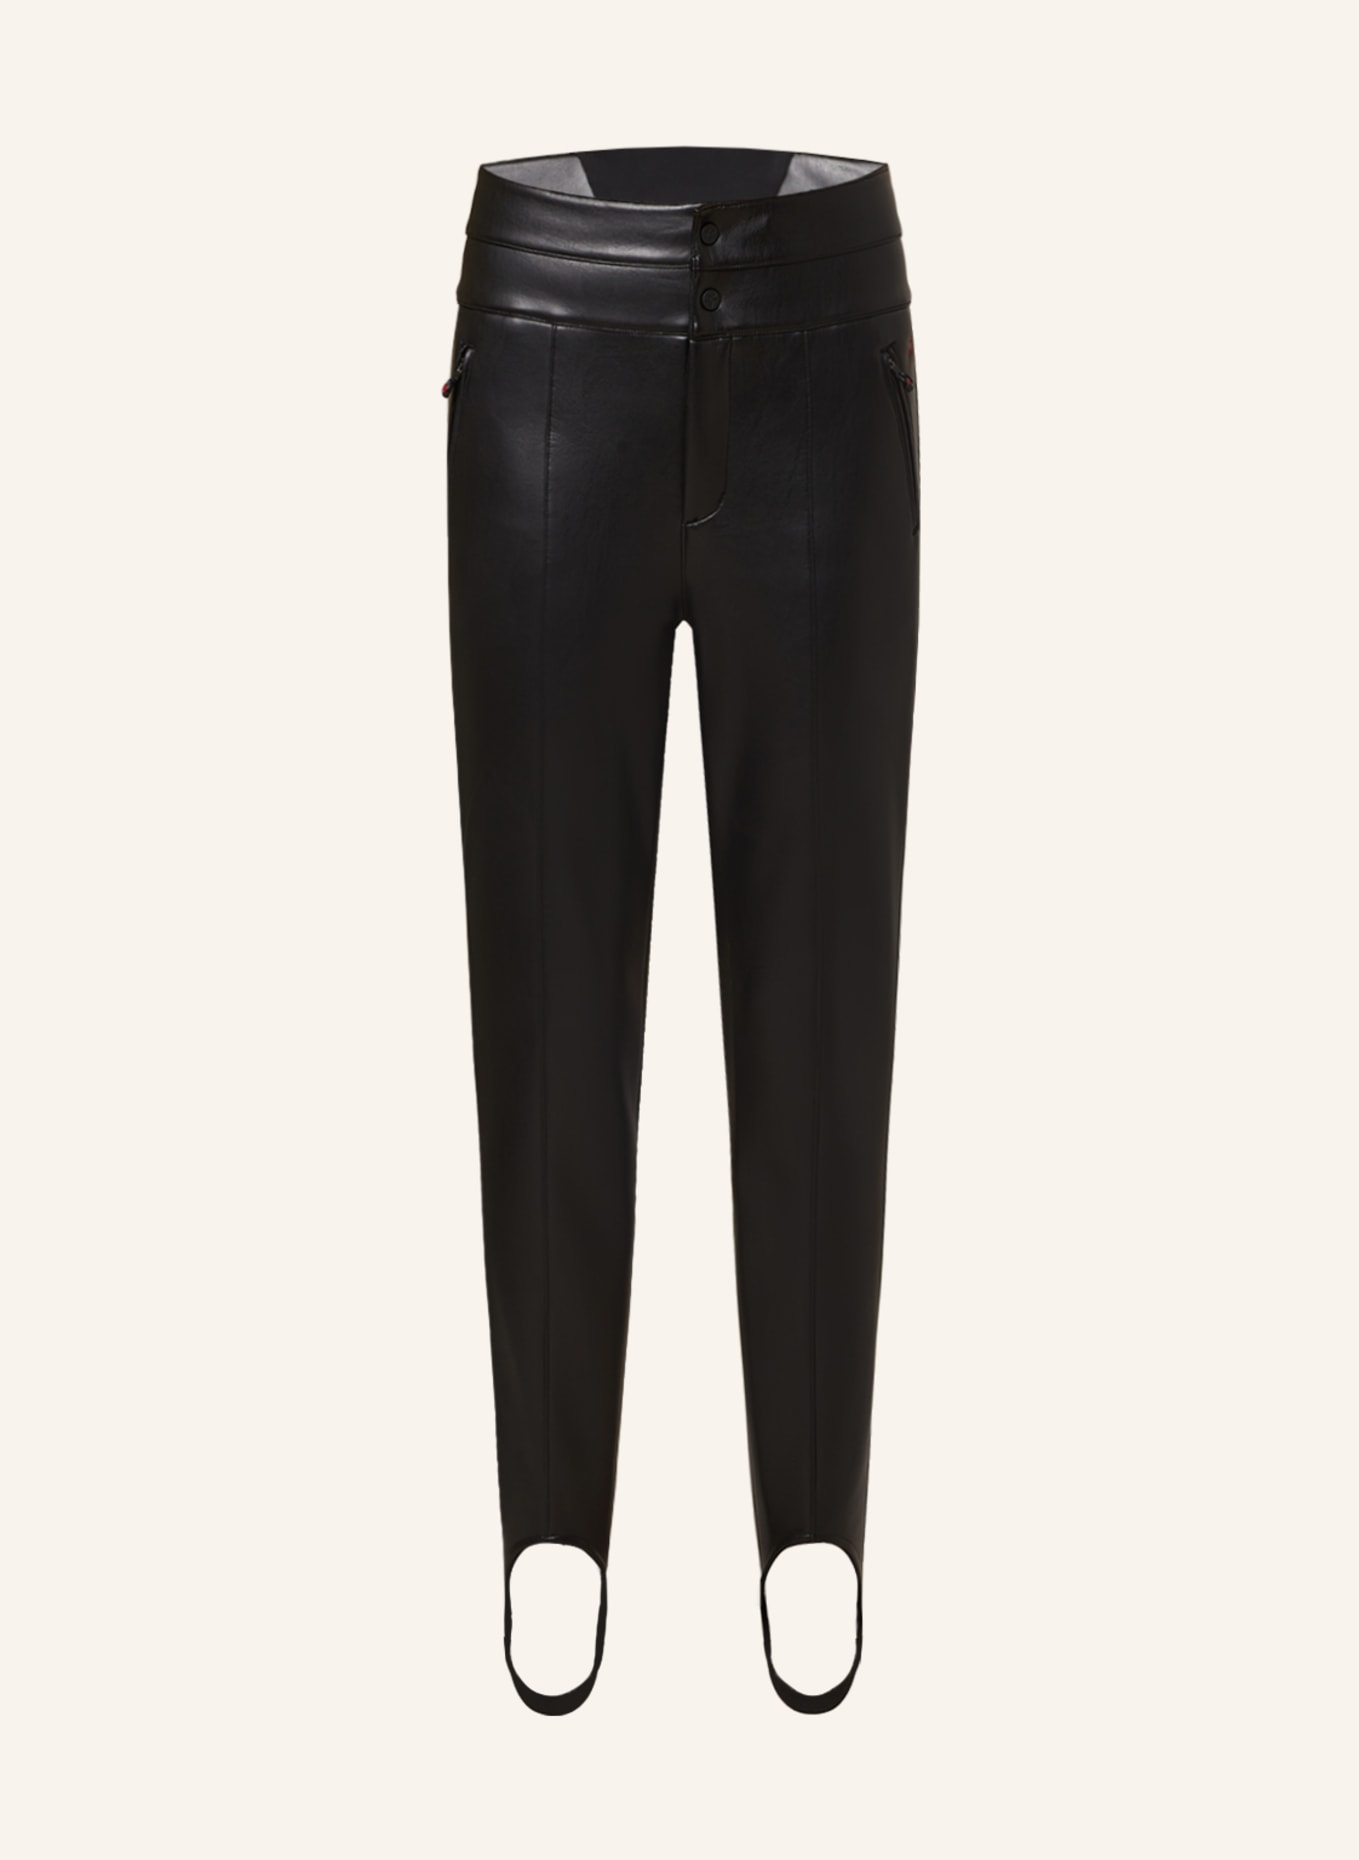 PERFECT MOMENT Stirrup ski pants AURORA in leather look in black